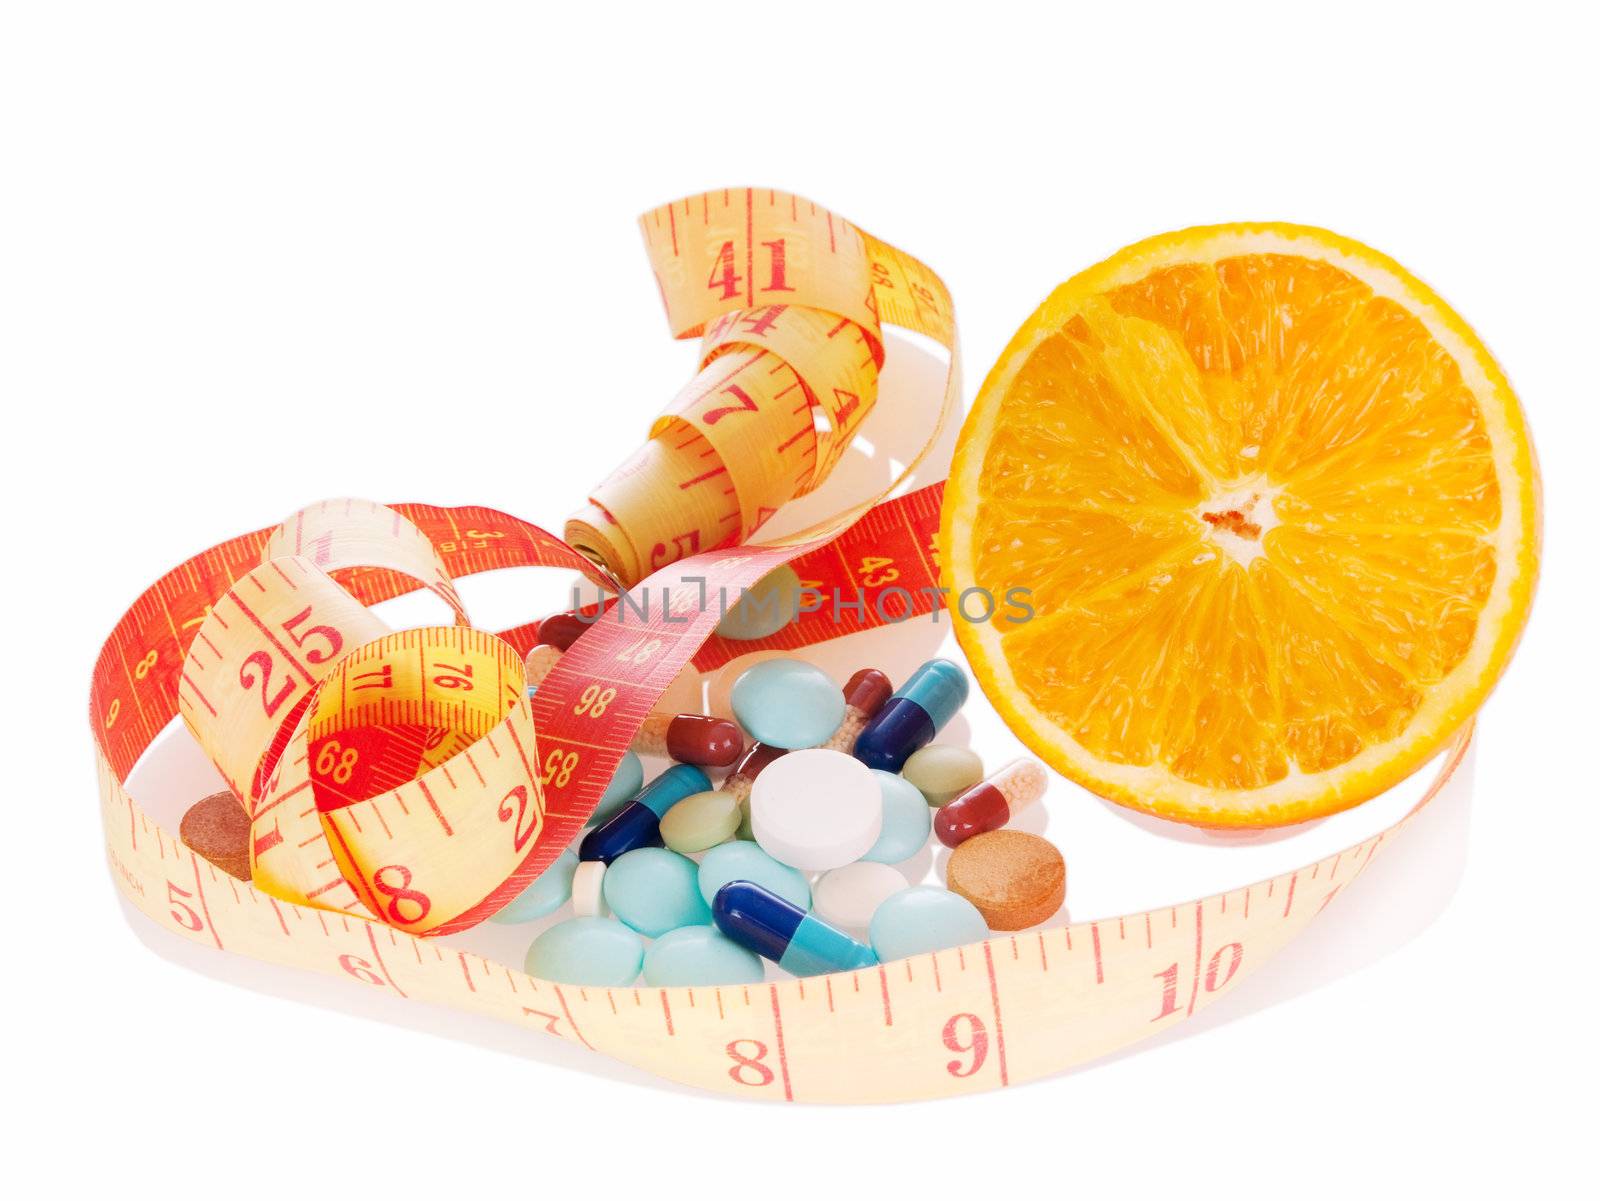 Concept of diet and medicine.  Heap of pills, orange slice and measuring tape with reflection on white background. Focus on orange.